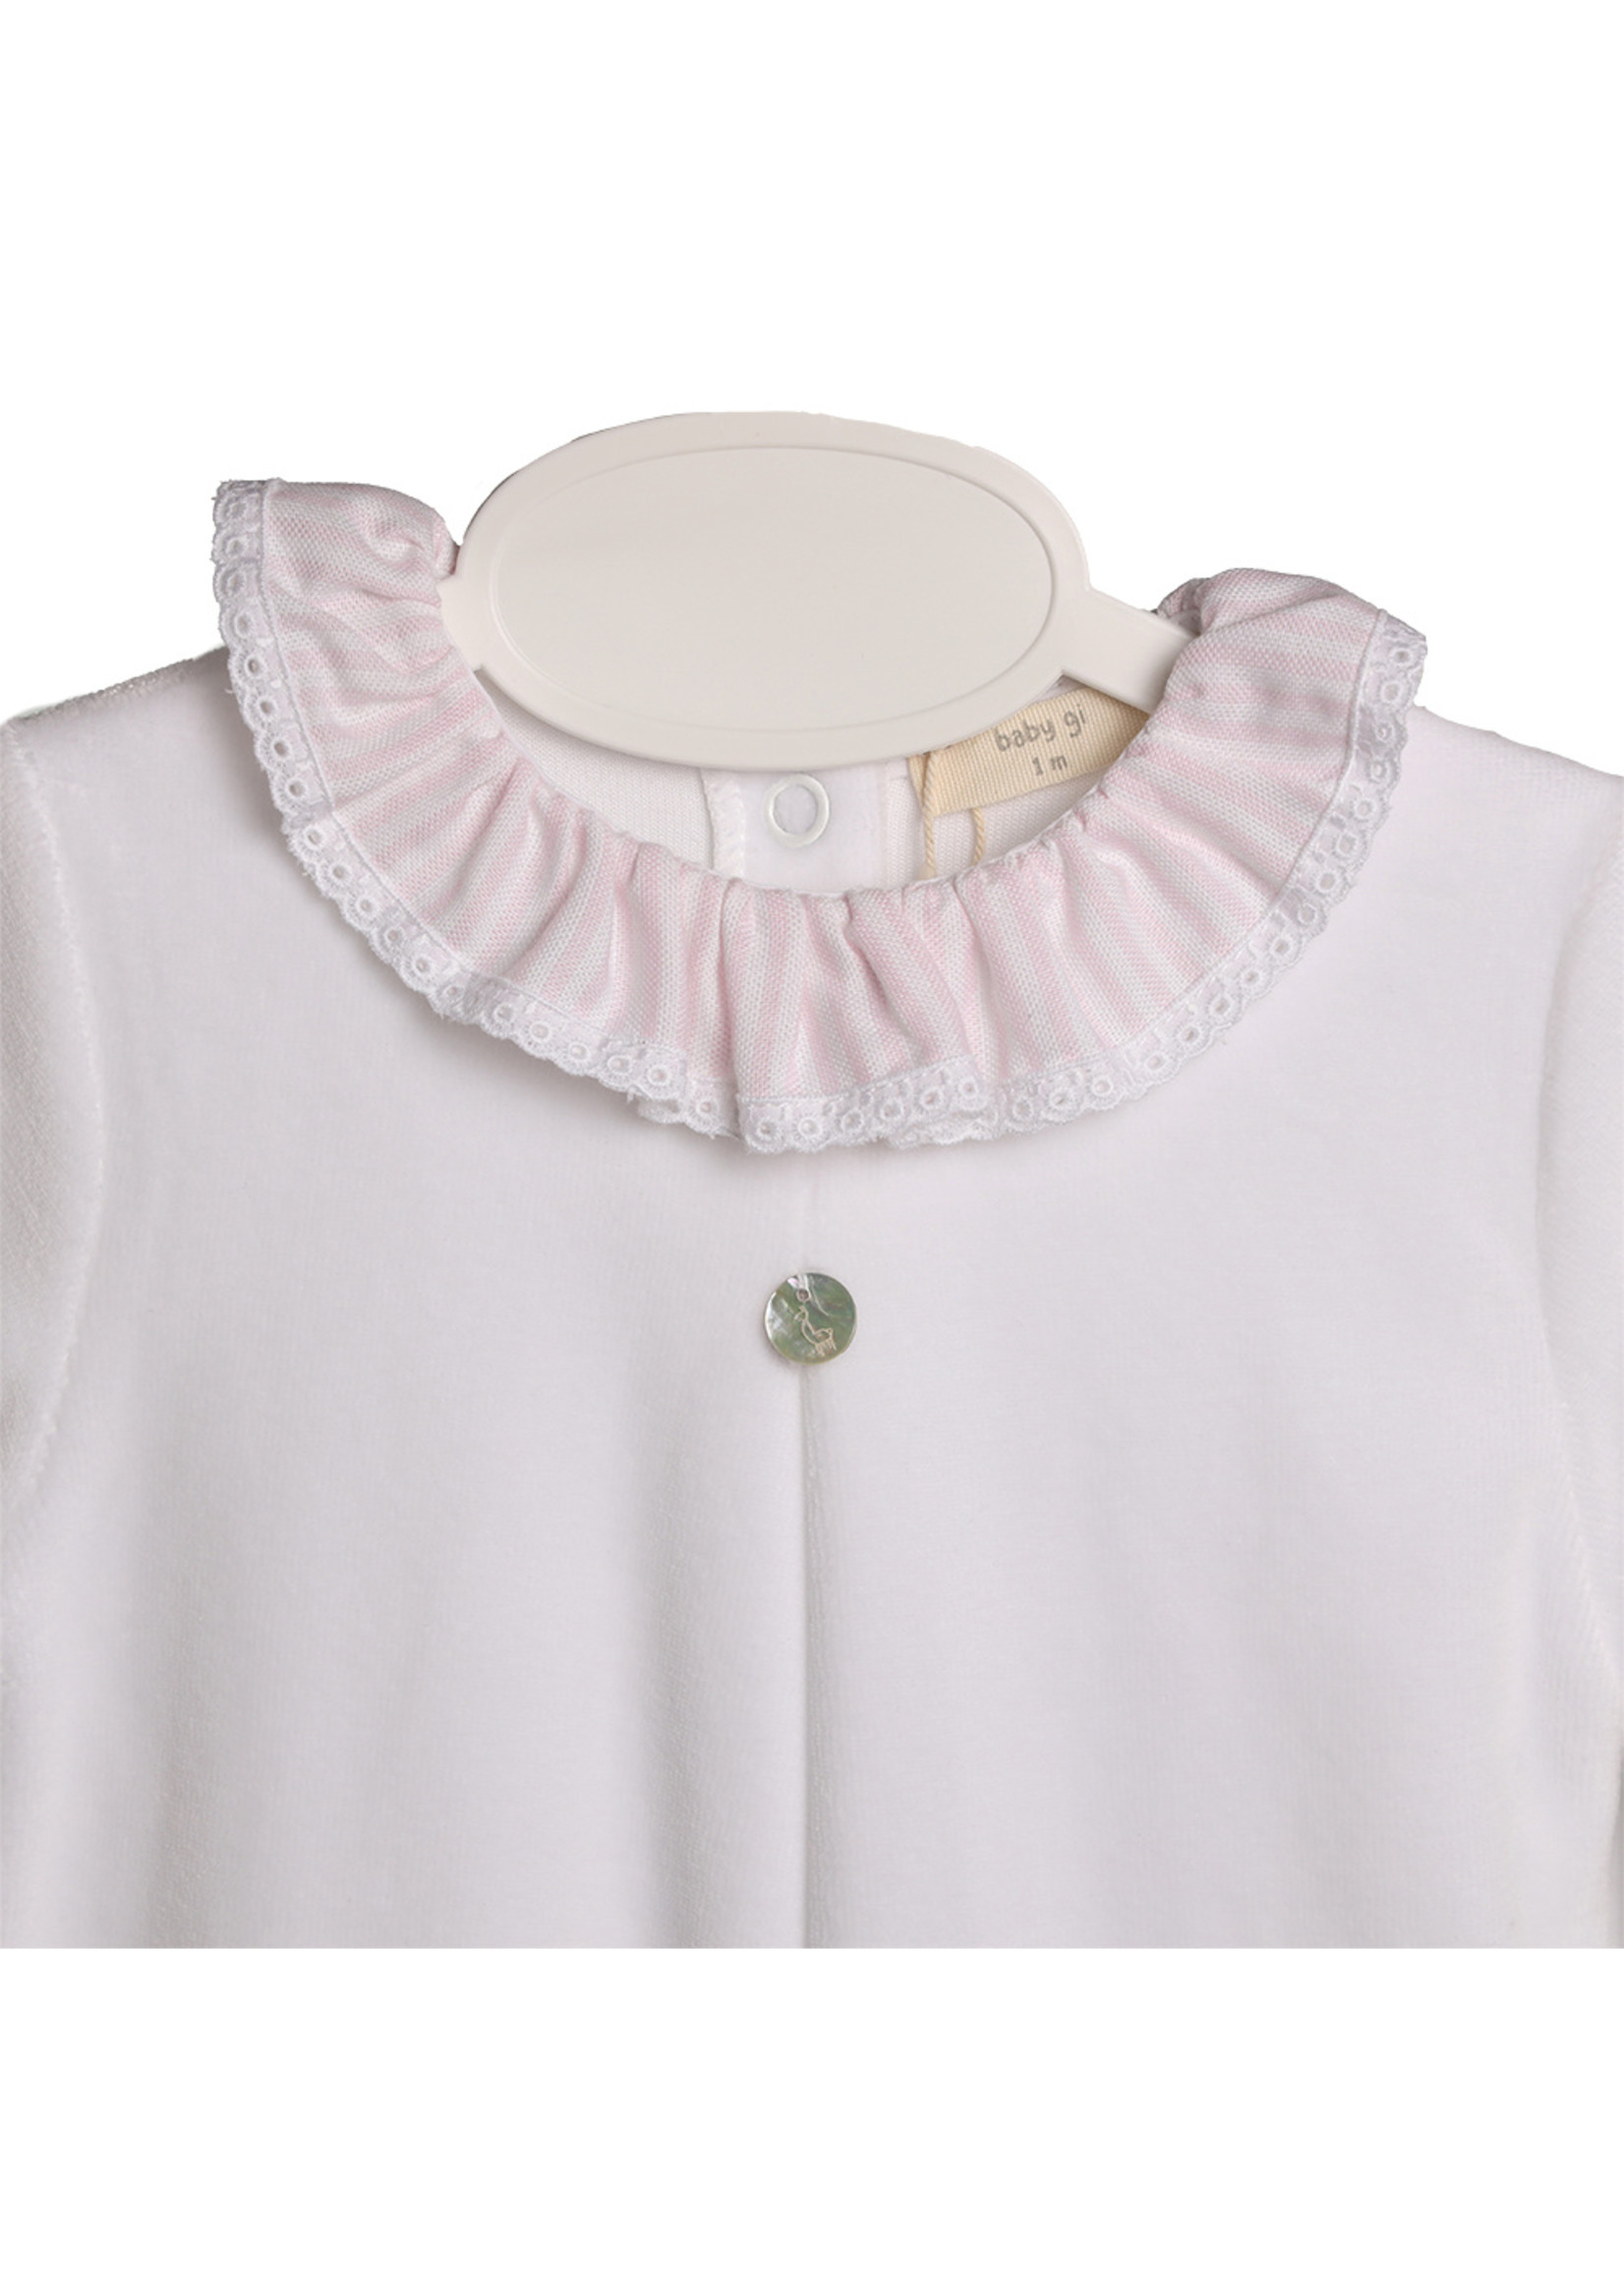 baby gi velour babygrow with frilly collar  pink detail white